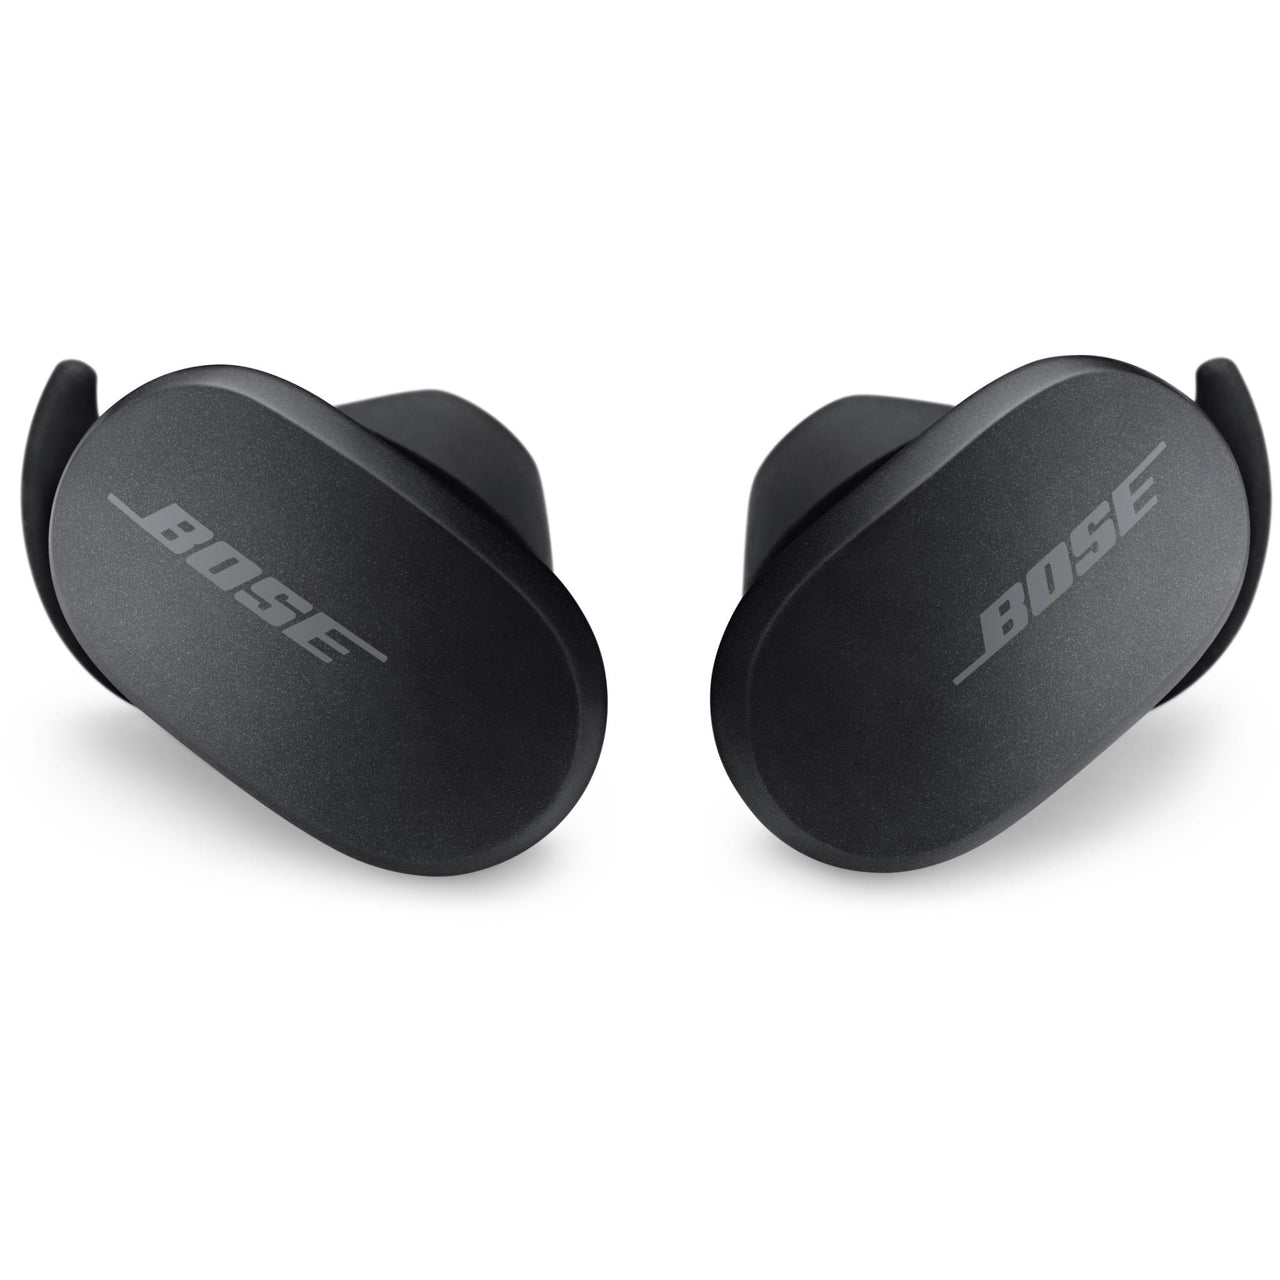 Bose QuietComfort Wireless Noise Cancelling Earbuds - Triple Black Bose